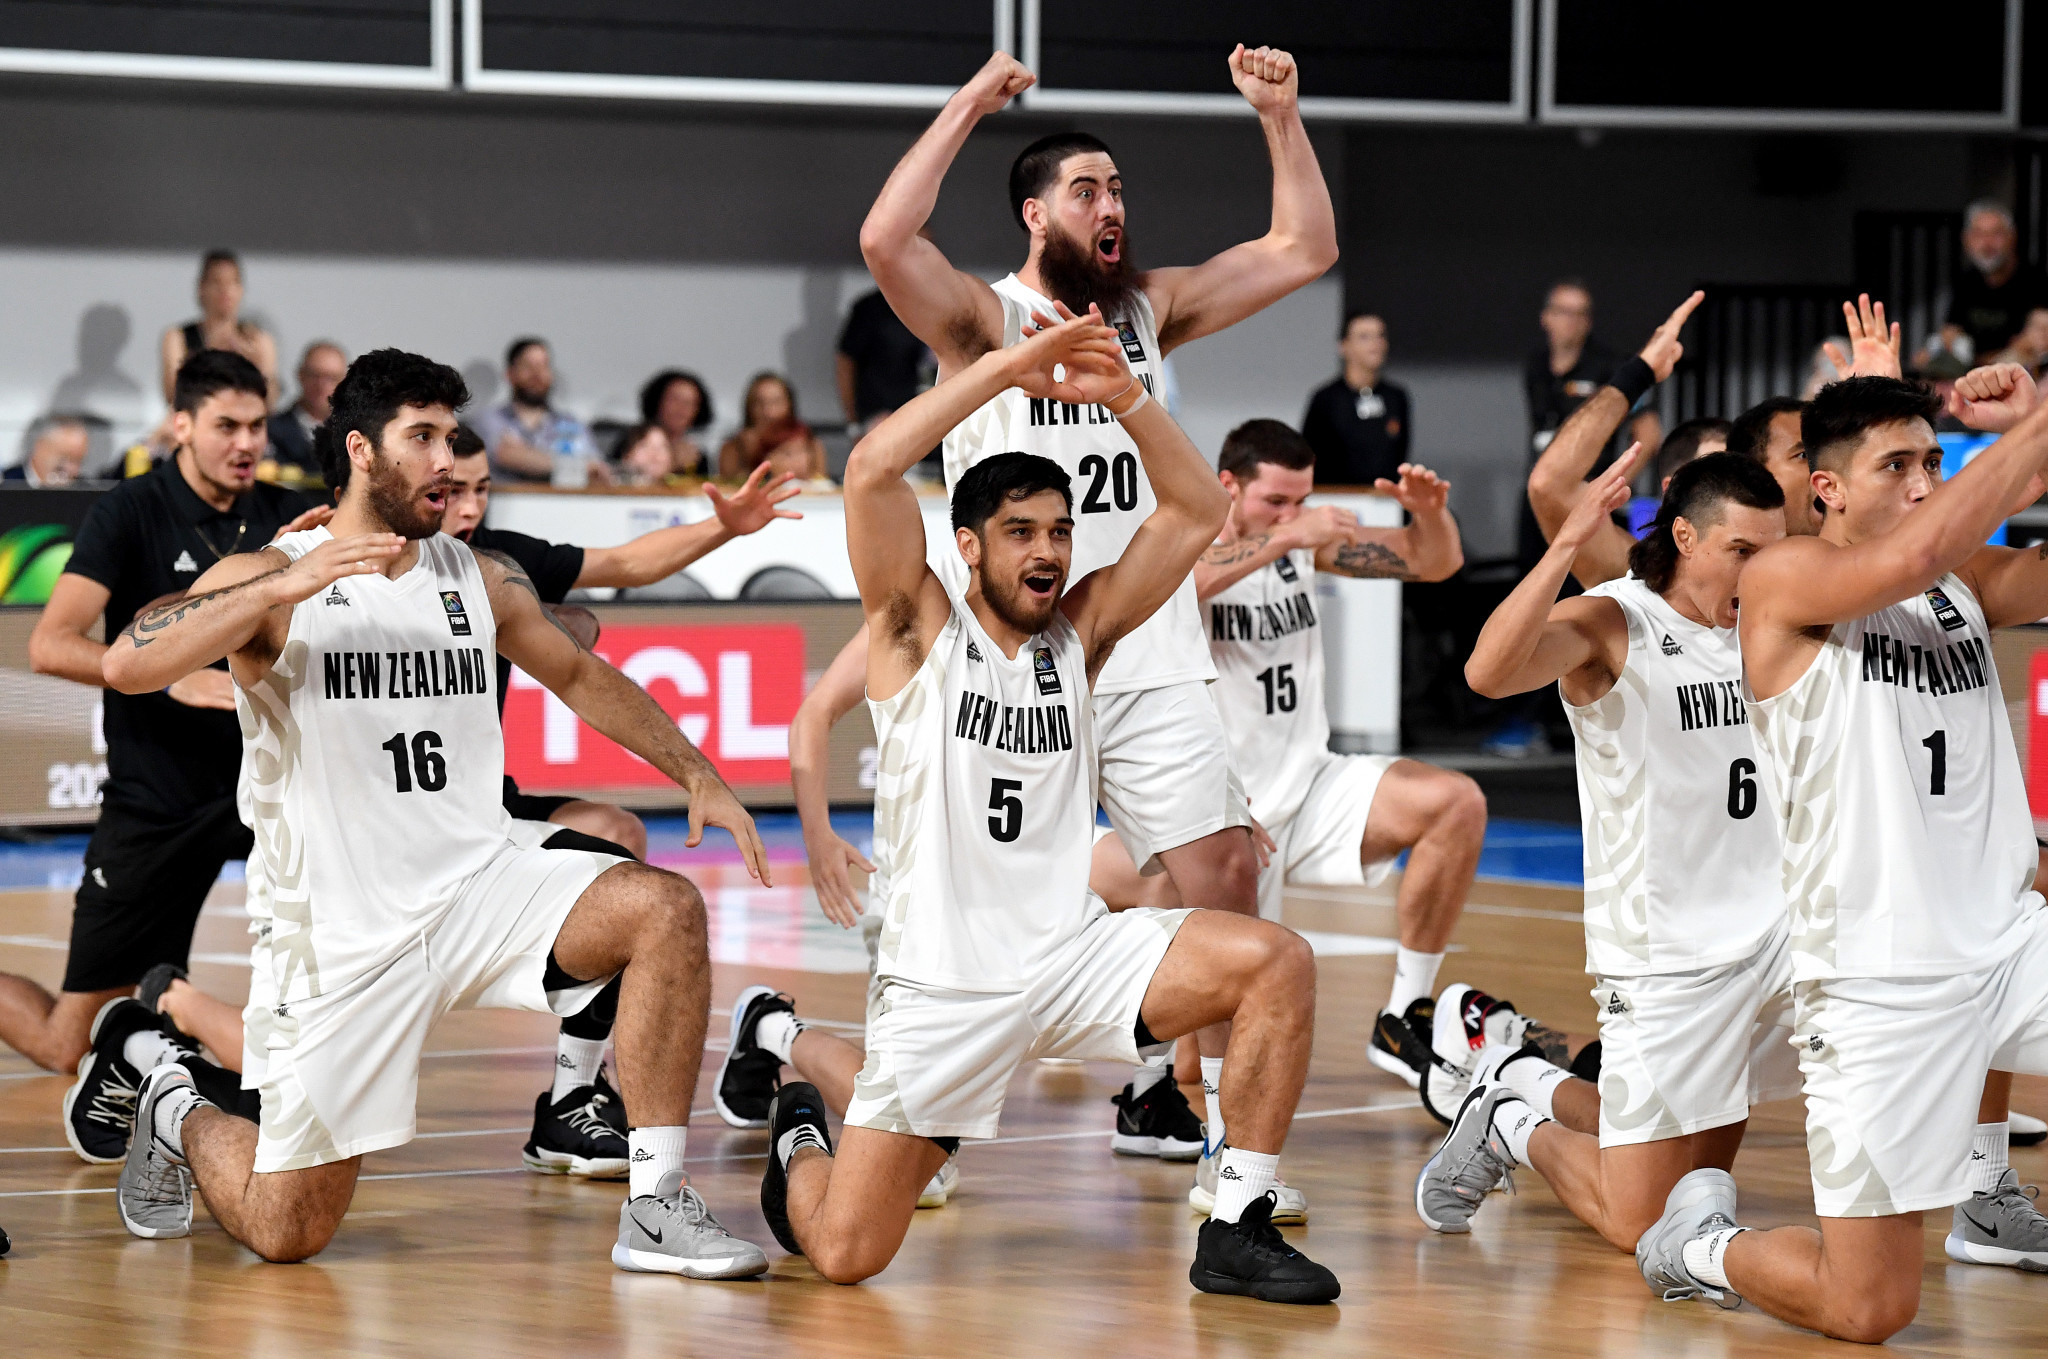 Basketball New Zealand will focus on long-term qualification cycles ©Getty Images